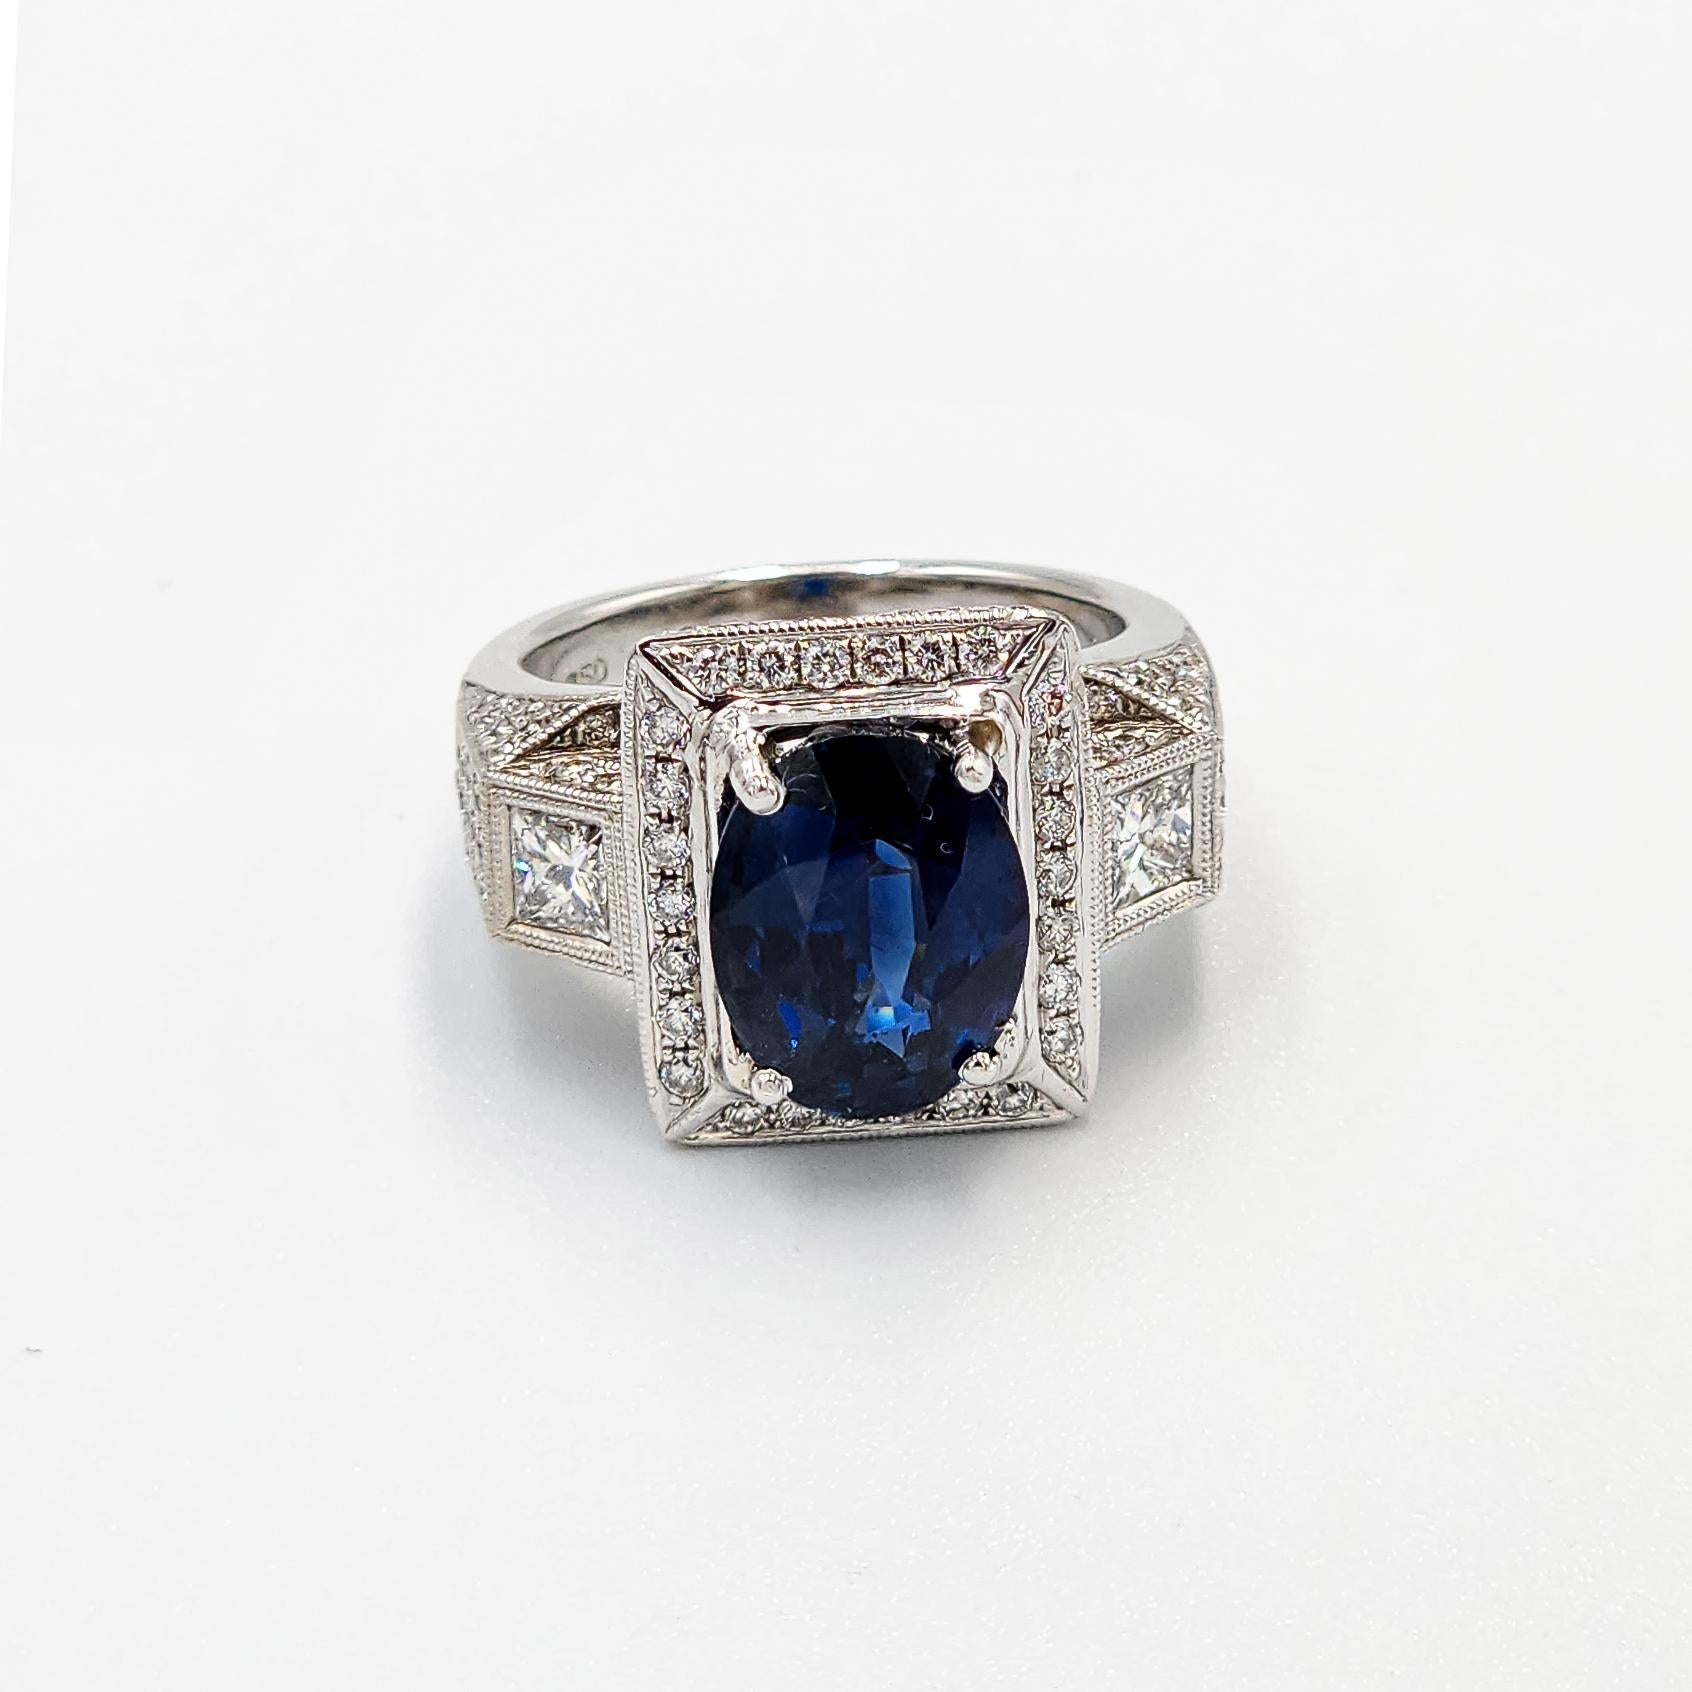 This is a beautiful GIA certified Blue Sapphire Ring with diamonds and 18k gold. It is a beautiful and amazing piece with vivid color, set in a custom designed ring to enhance its natural beauty!
Blue Sapphire : 4.57  carats
Certificate:  